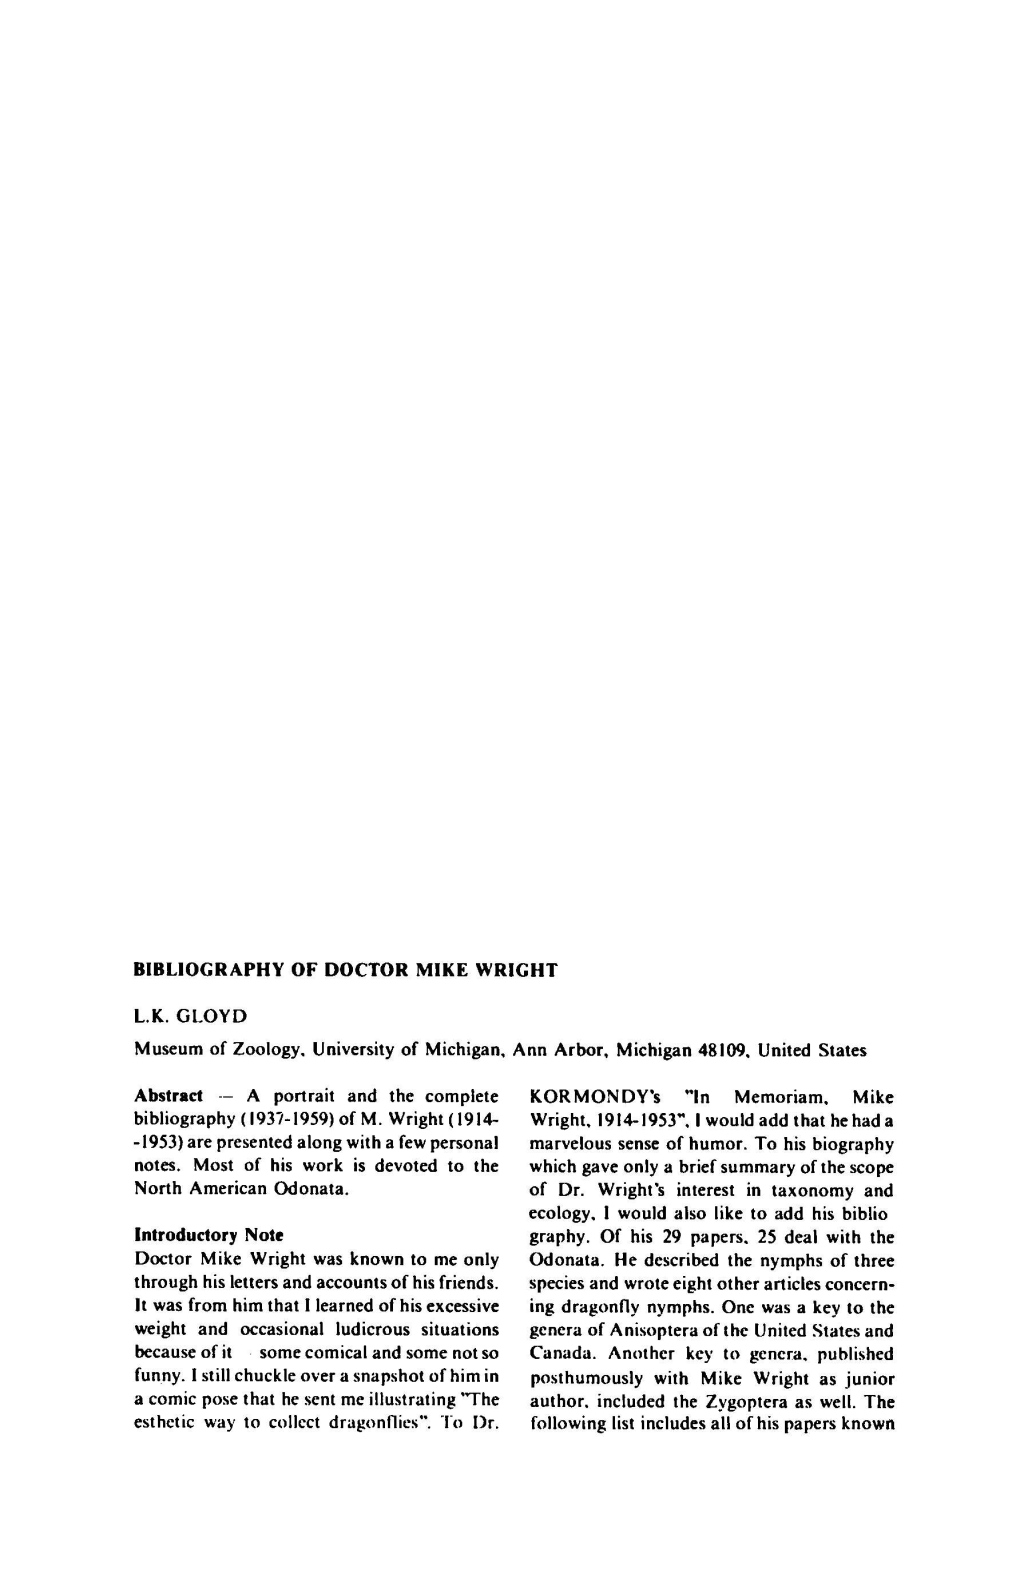 Bibliography of Doctor Mike Wright L.K. Gloyd Museum of Zoology